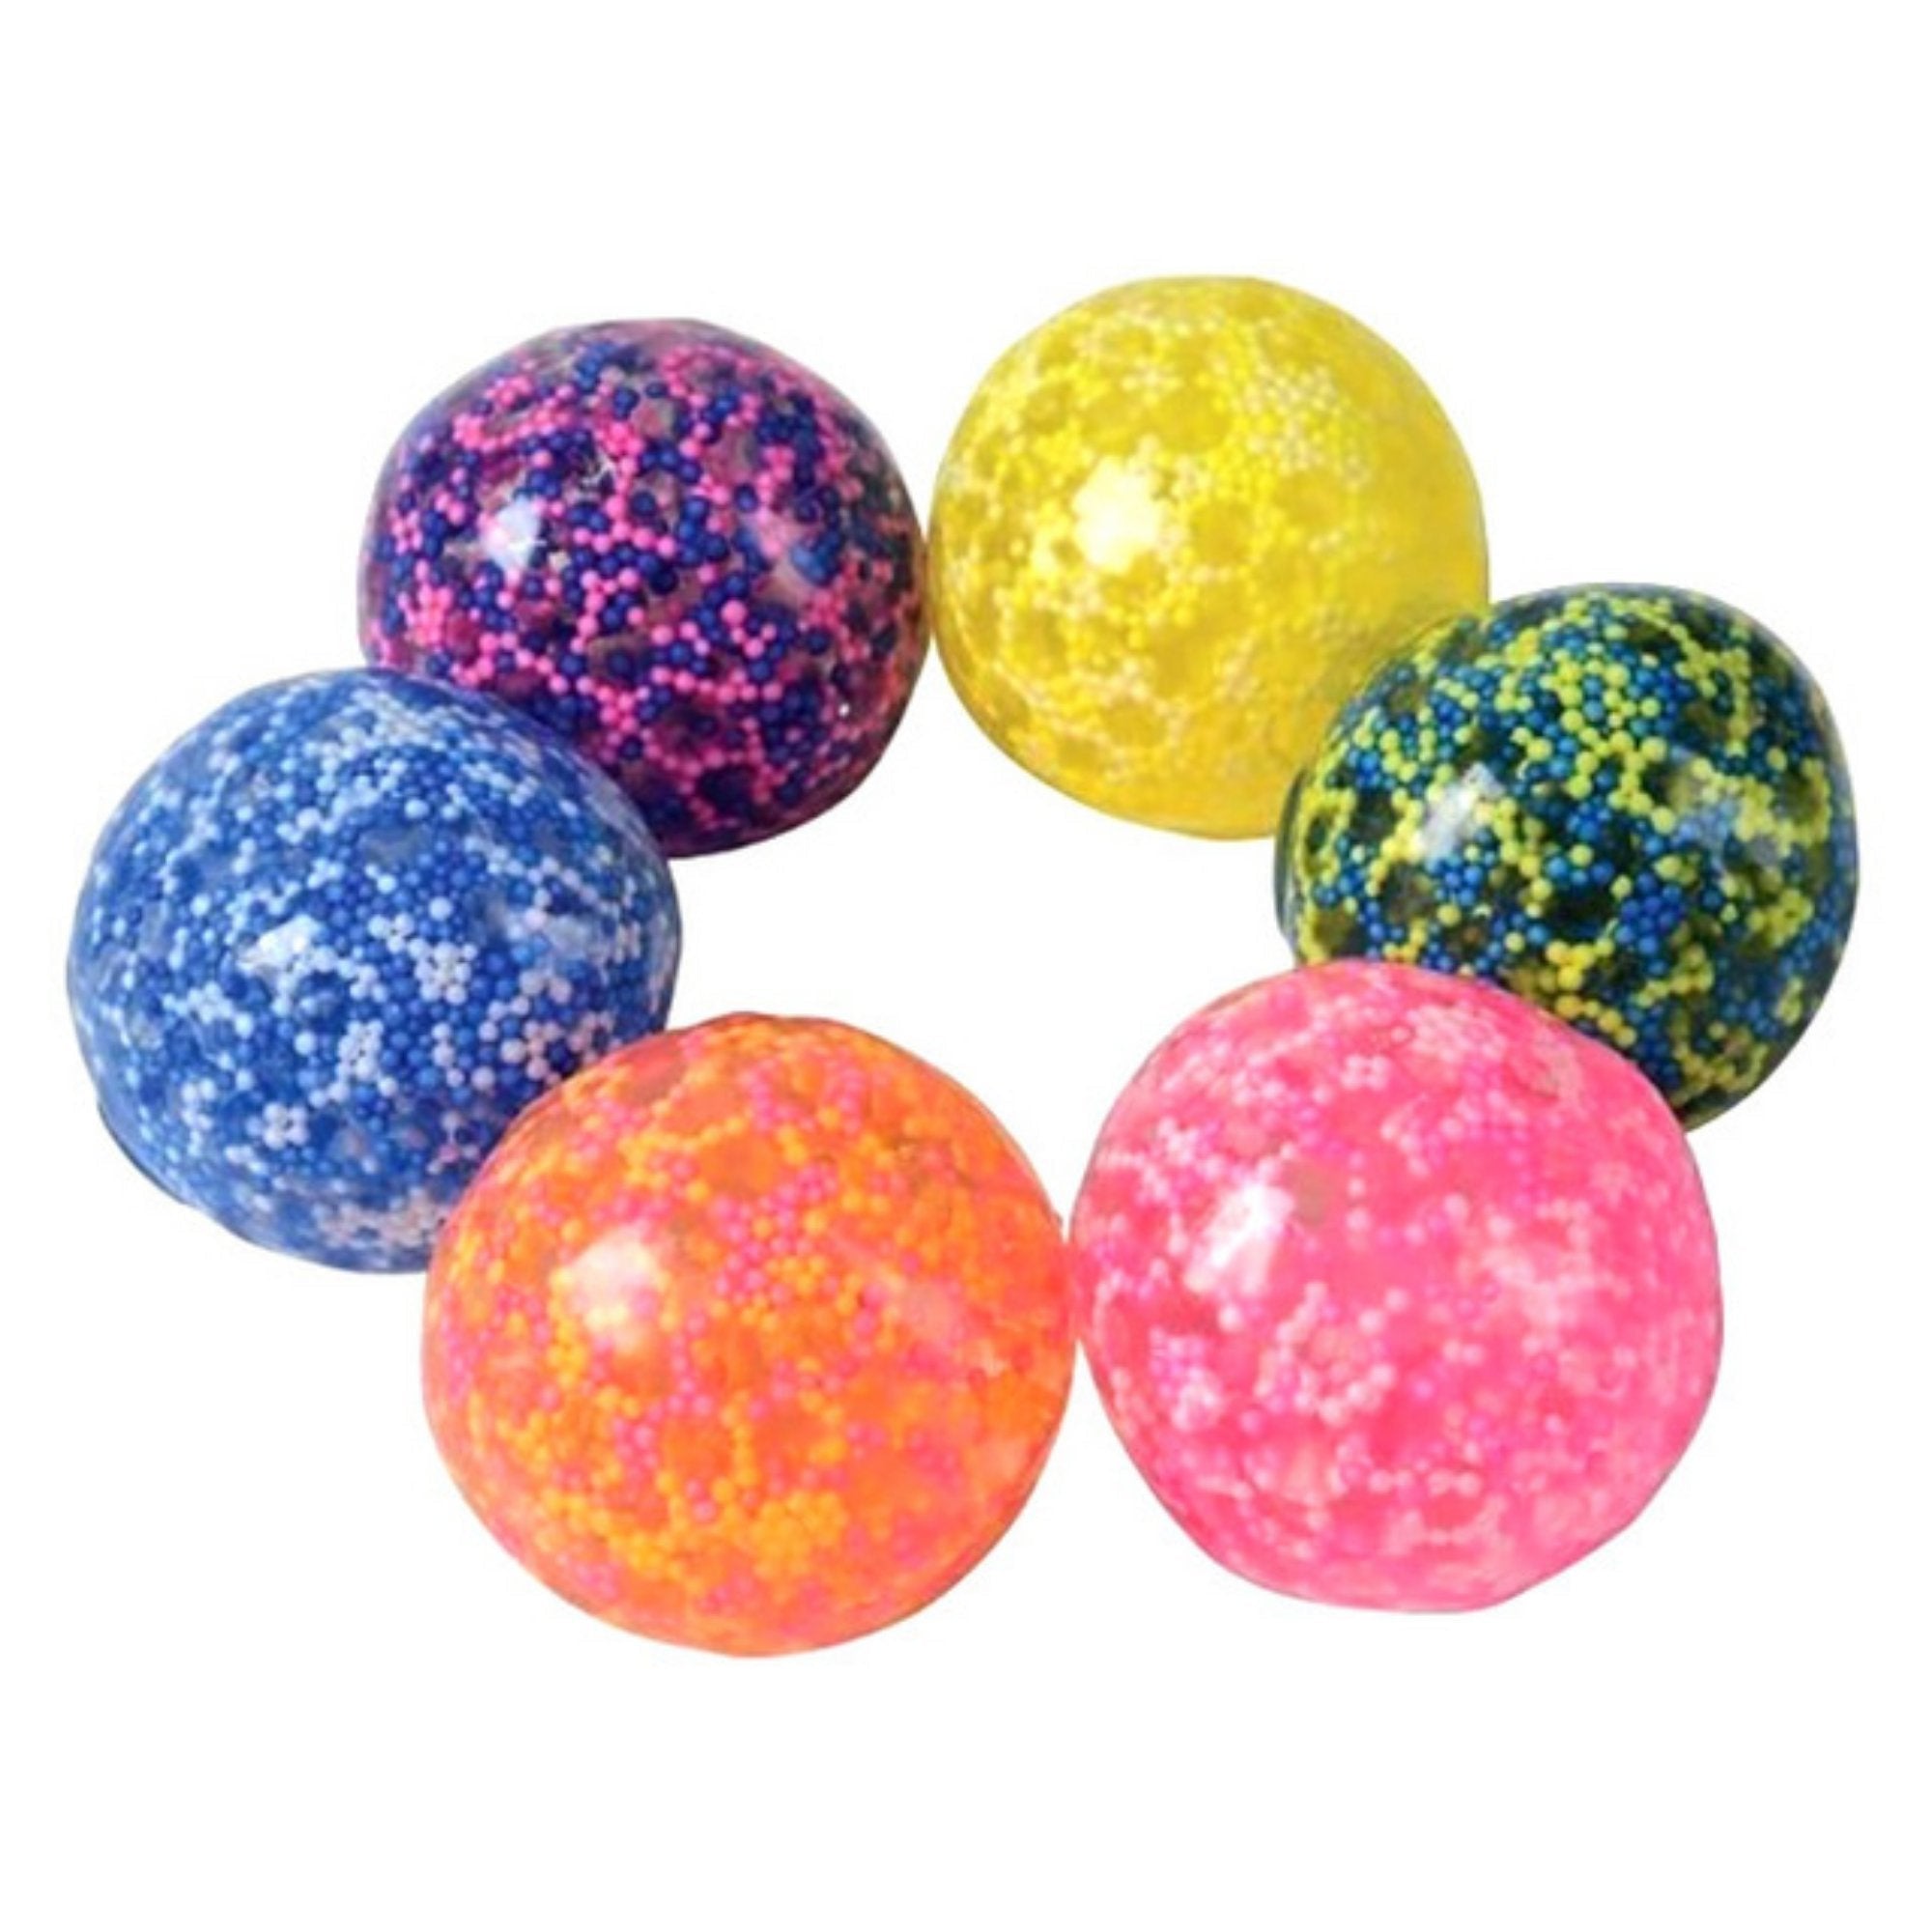 Air Bean Ball, Introducing our Super Squishy and Stretchy Ball! This amazing toy is specifically designed to provide endless hours of squishing and stretching fun. Filled with hundreds of tiny beads, the unique filling of this ball offers a highly intriguing tactile element that sets it apart from other squashy toys.Unlike traditional stress balls, our squishy ball provides a delightful alternative. Squeeze it, stretch it, and experience the satisfaction of watching it bounce back to its original shape. The